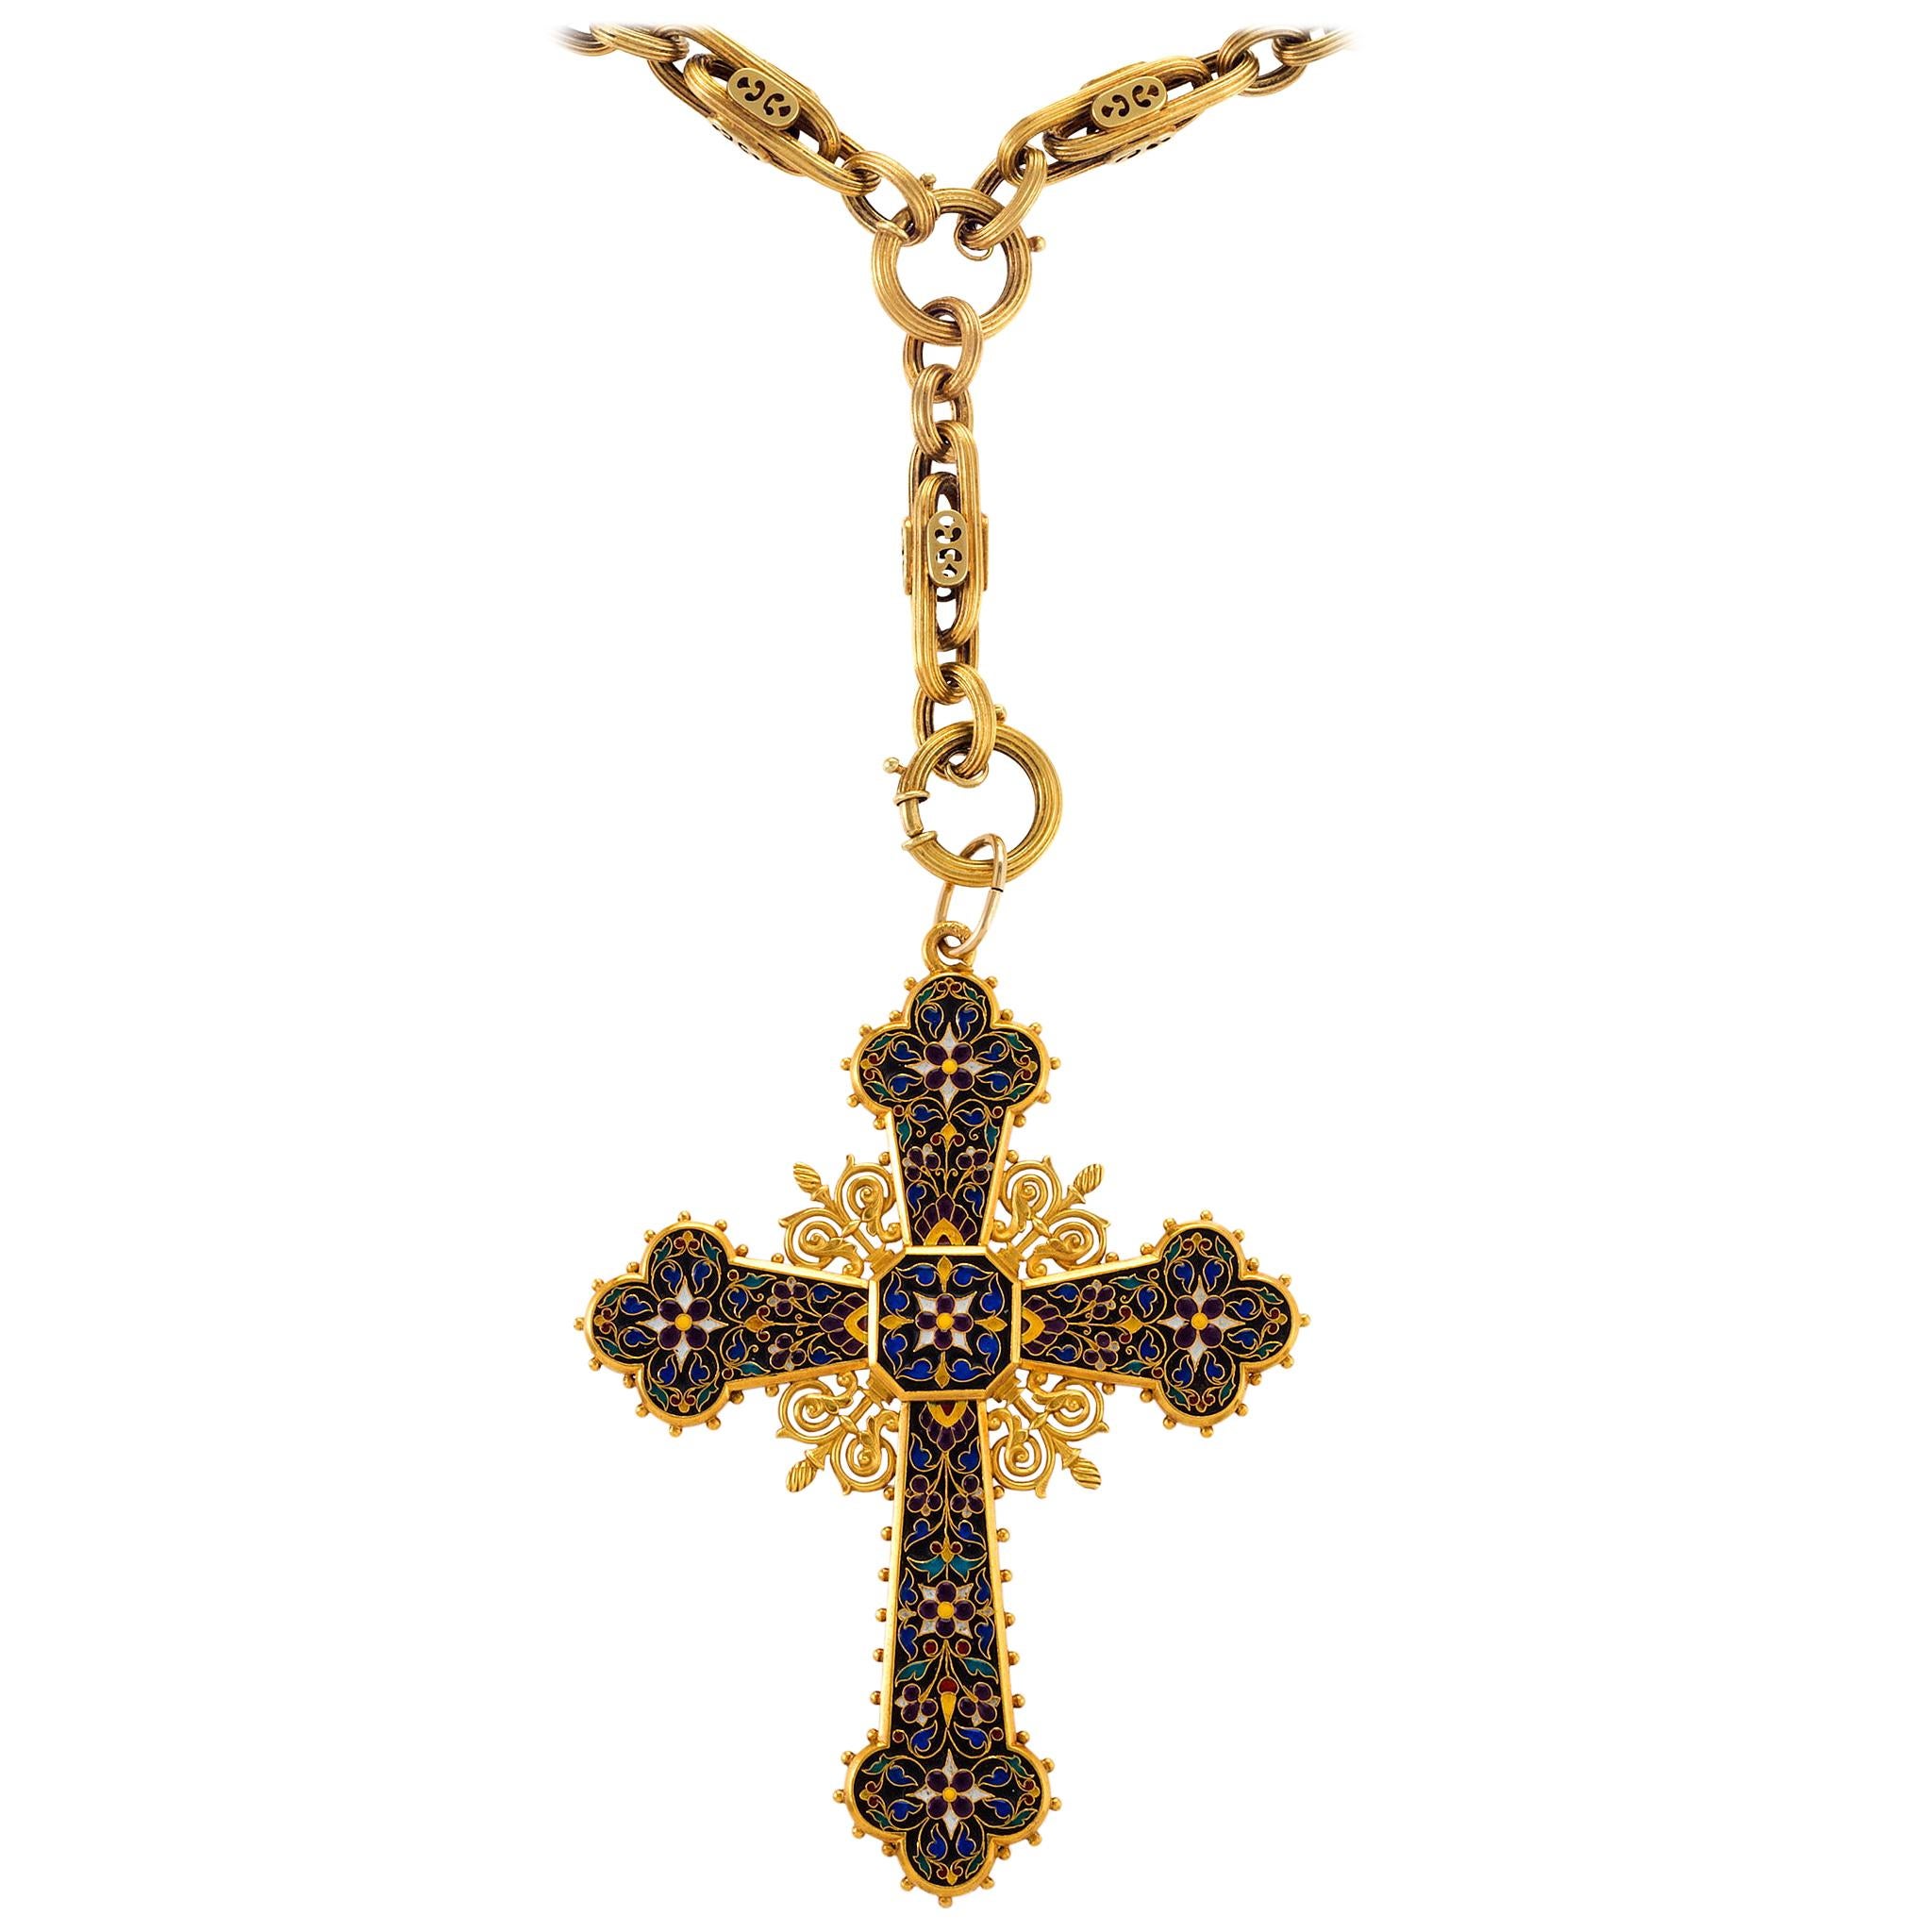 Enamel and Gold Cross Pendant Necklace